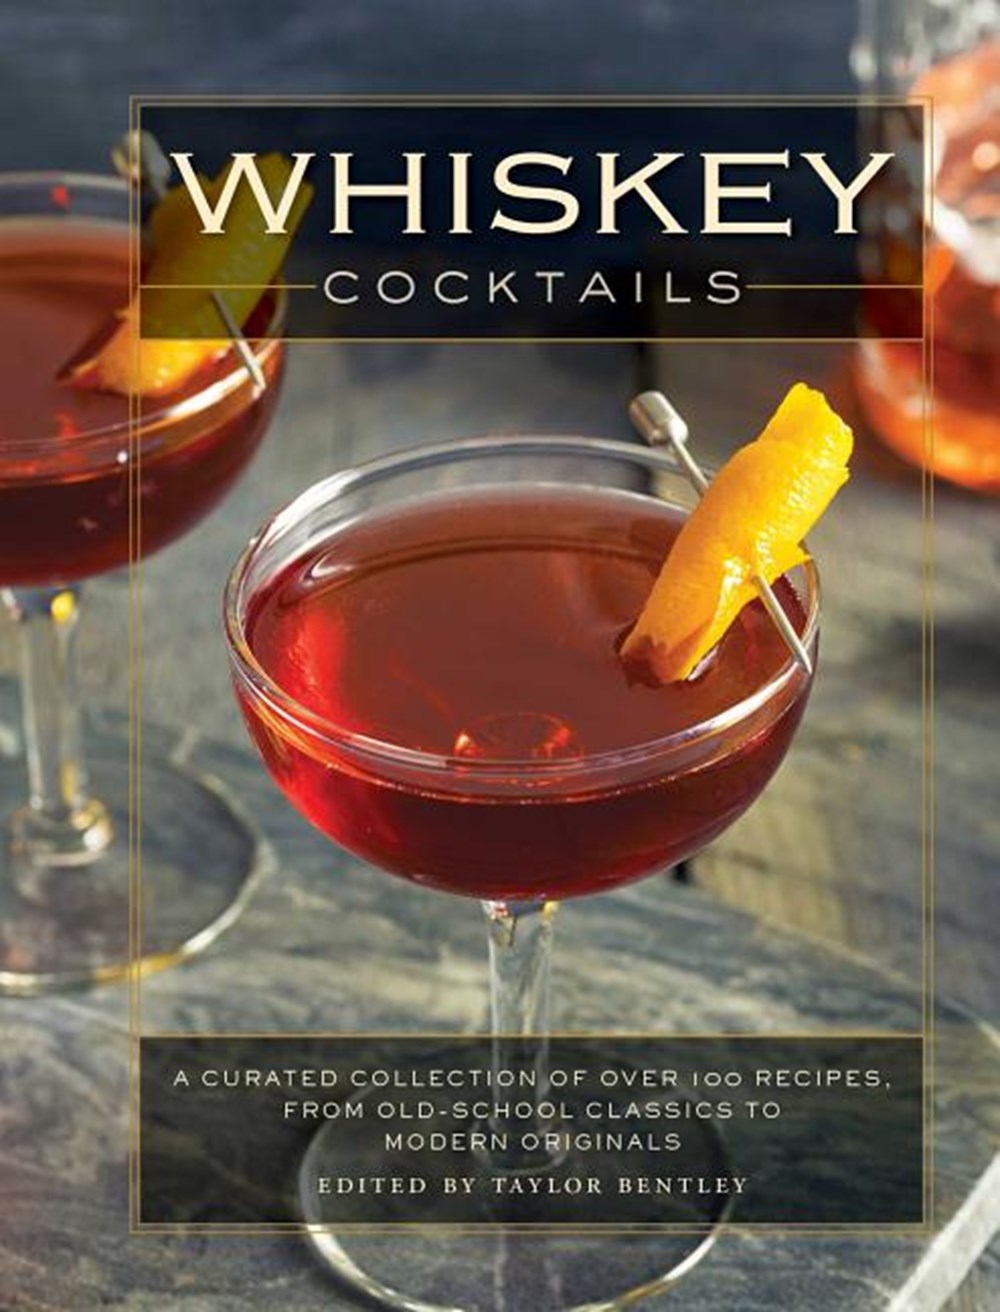 Whiskey Cocktails: A Curated Collection of Over 100 Recipes, from Old School Classics to Modern Orig